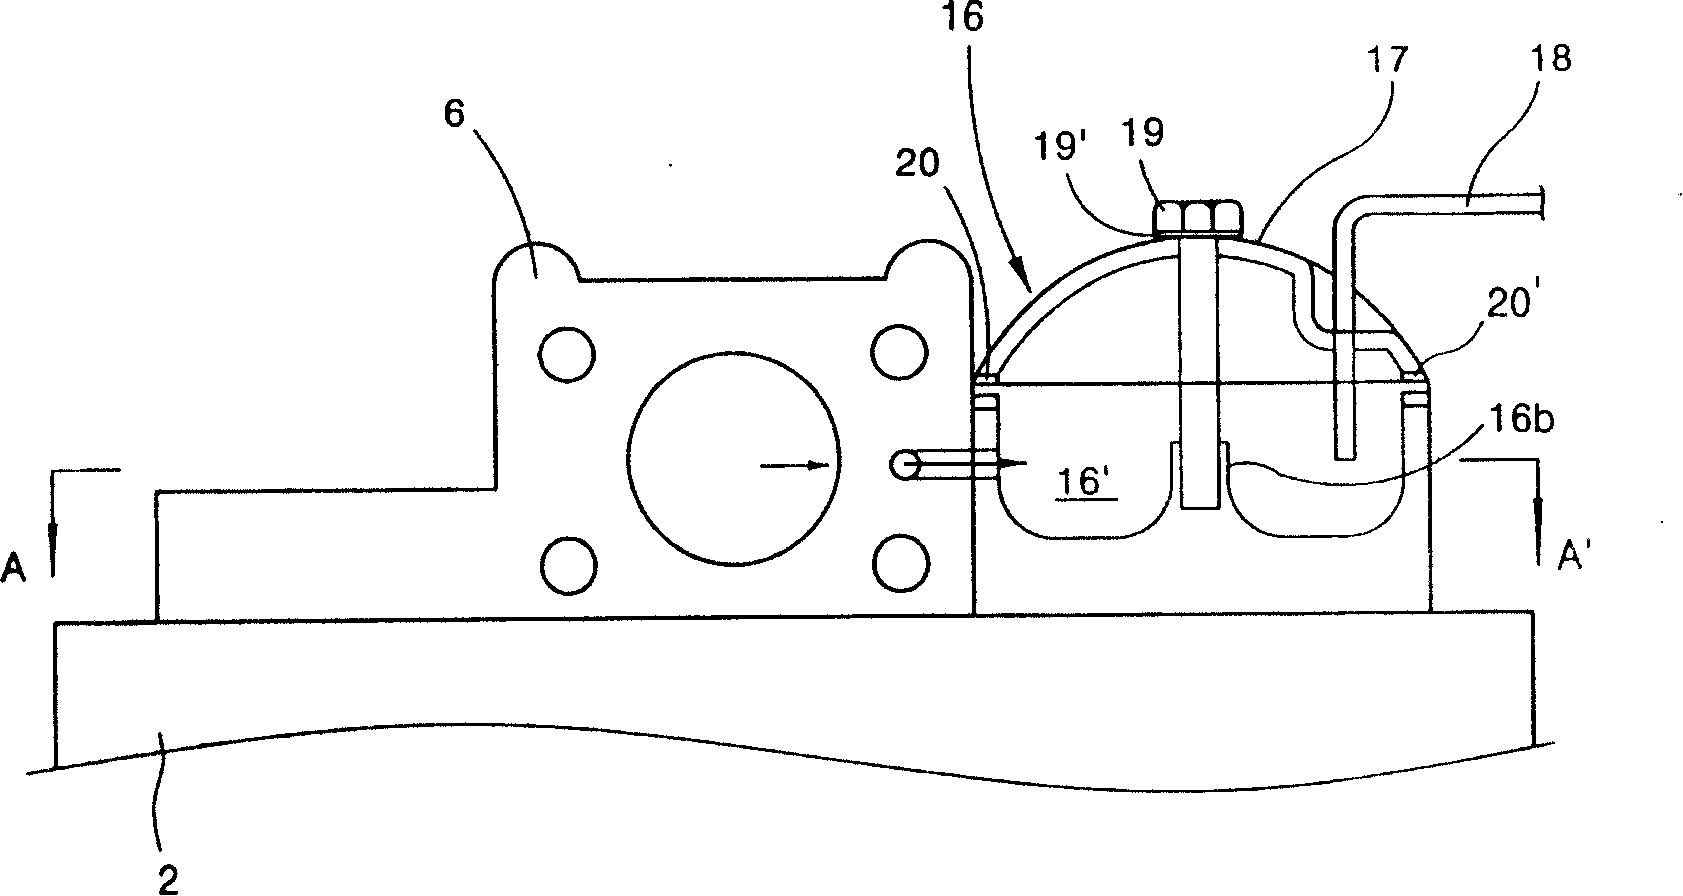 Discharge silencer fixing structure for hermetic compressor